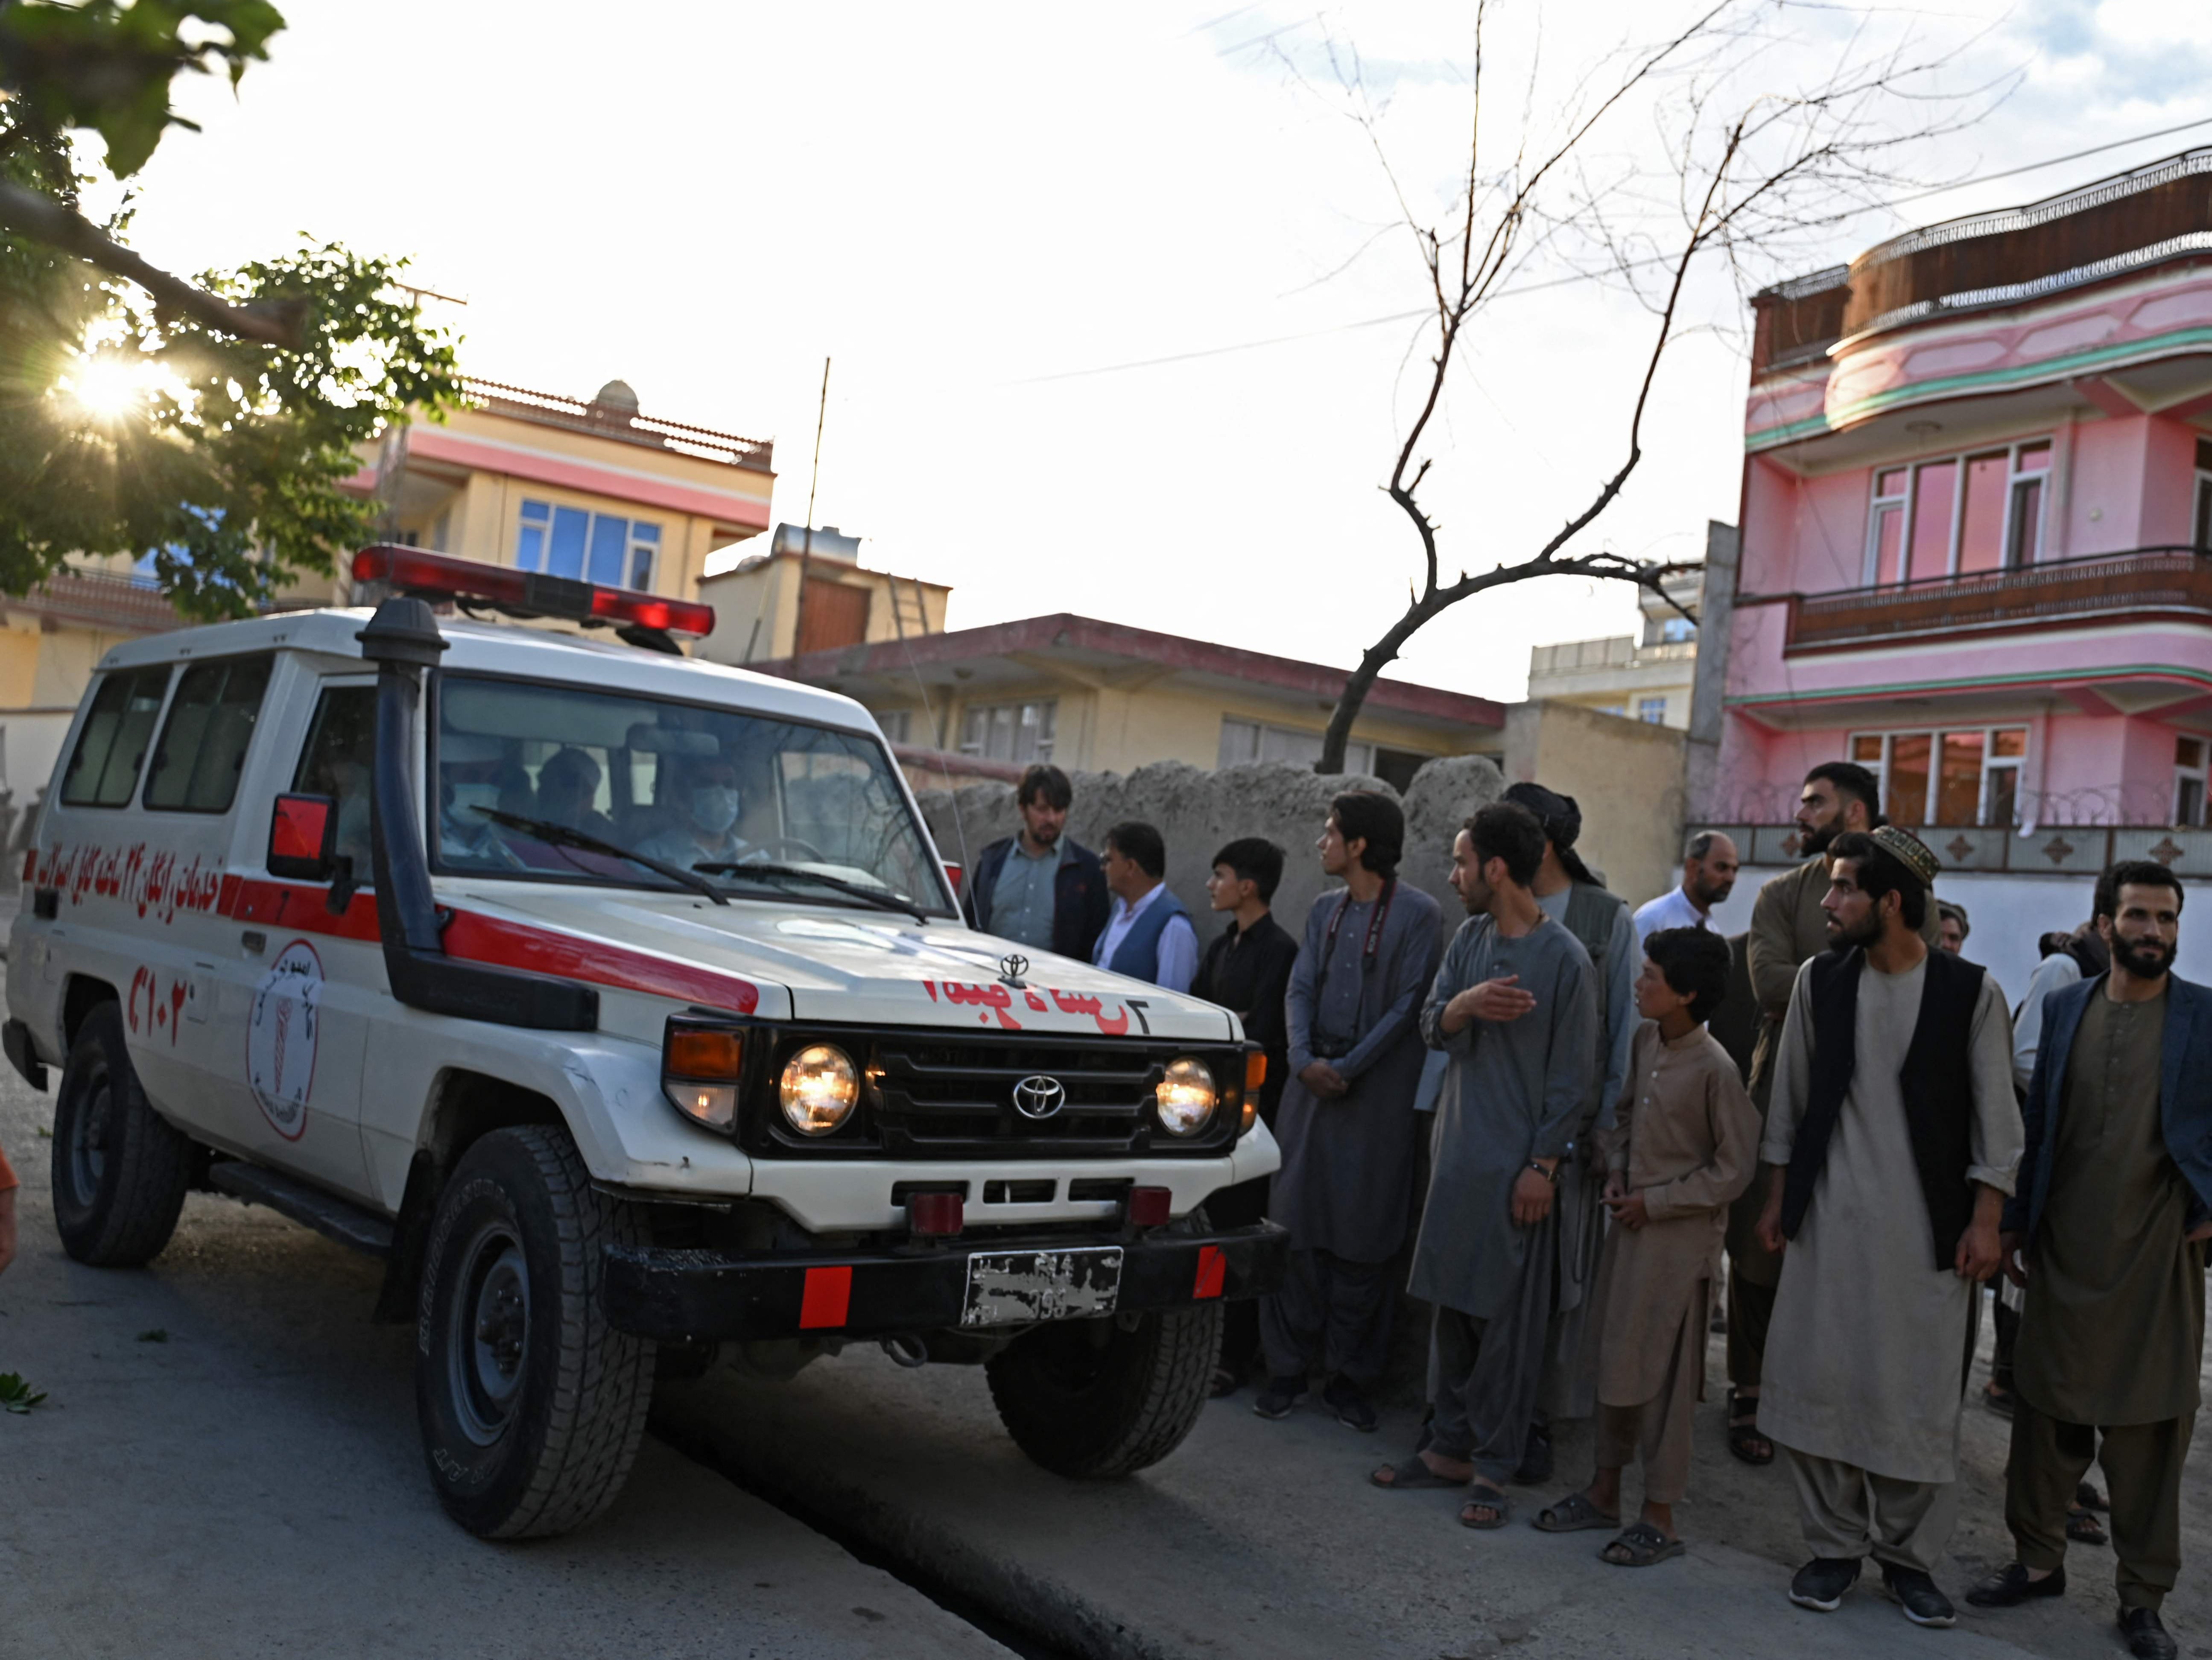 Onlookers stand next to an ambulance carrying victims near the site of a blast in Kabul